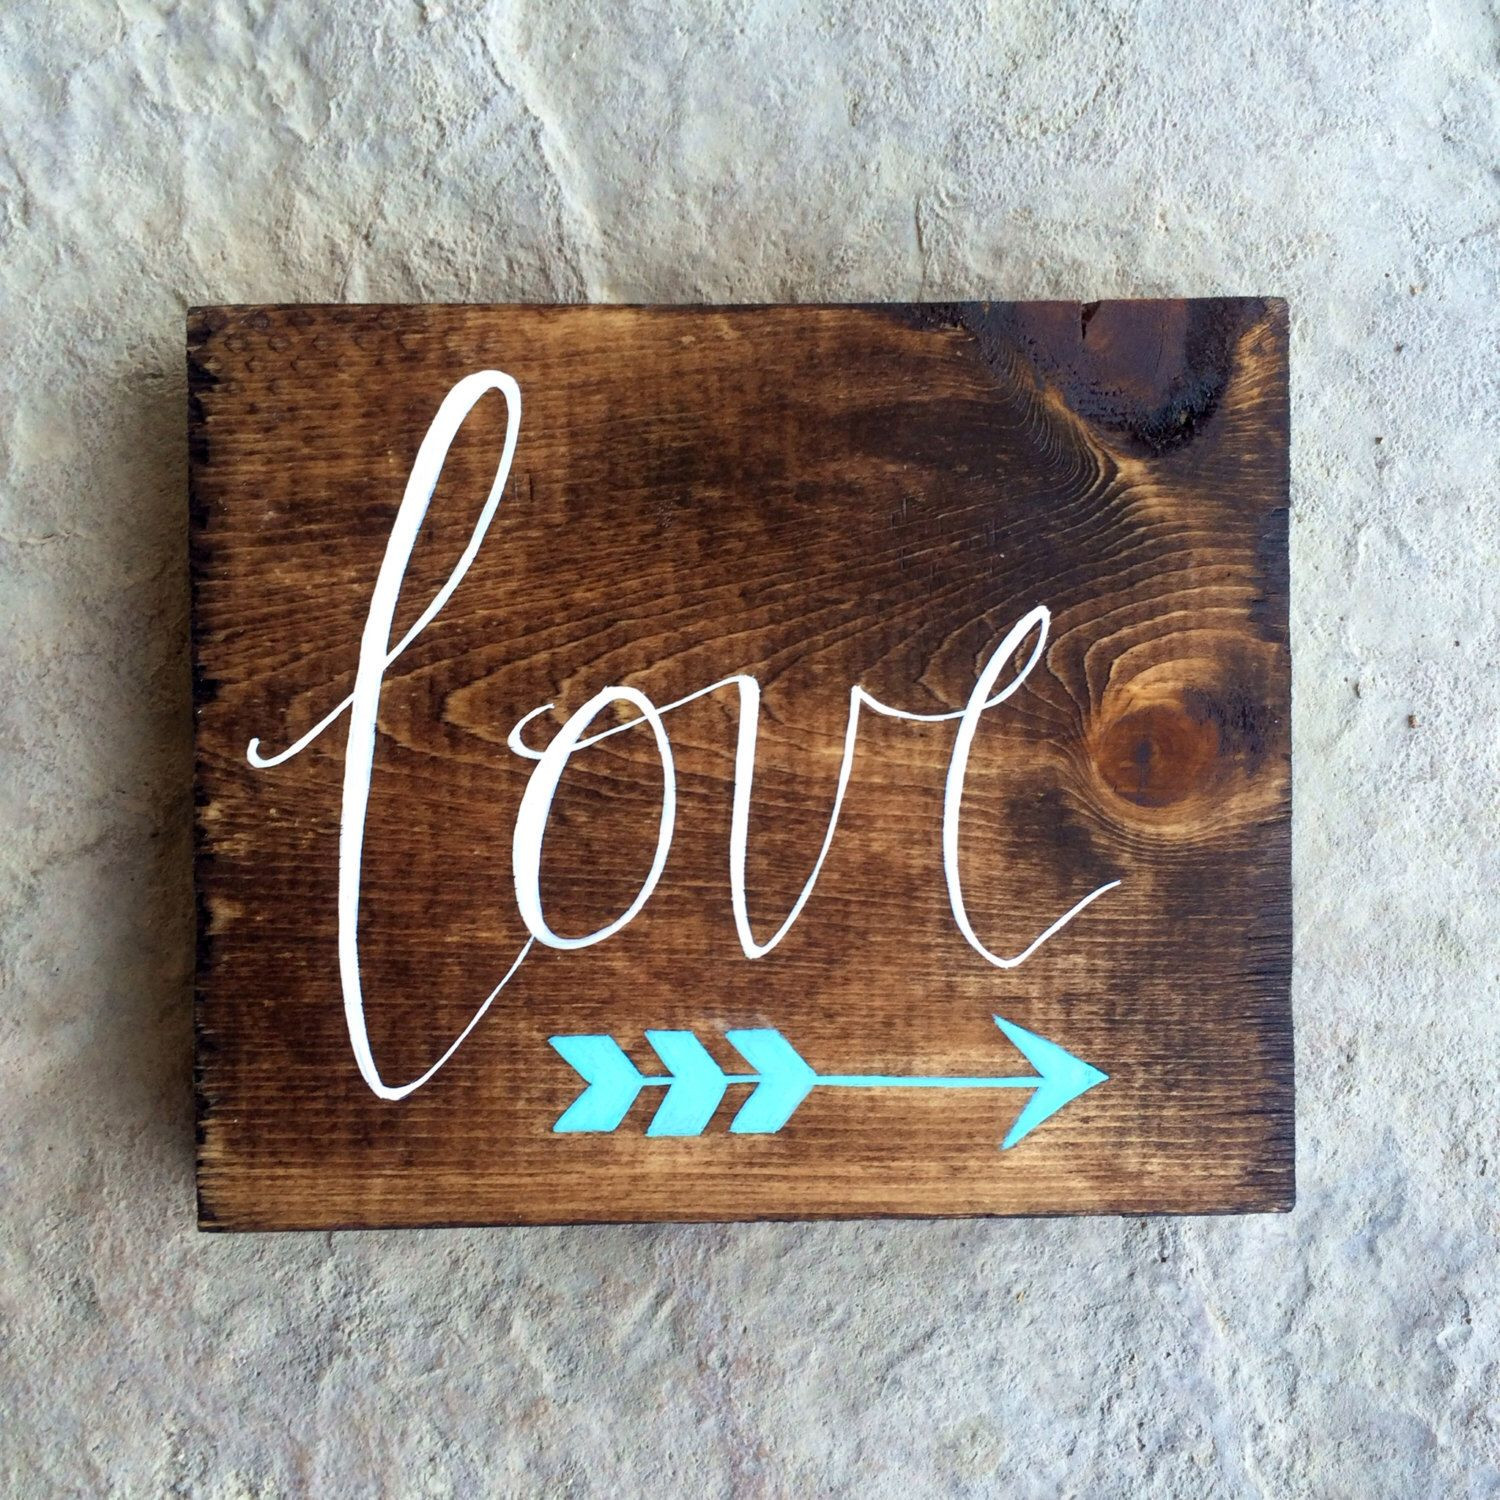 DIY Painted Wooden Signs
 Custom Small Hand Painted Wooden Love Sign With Arrow